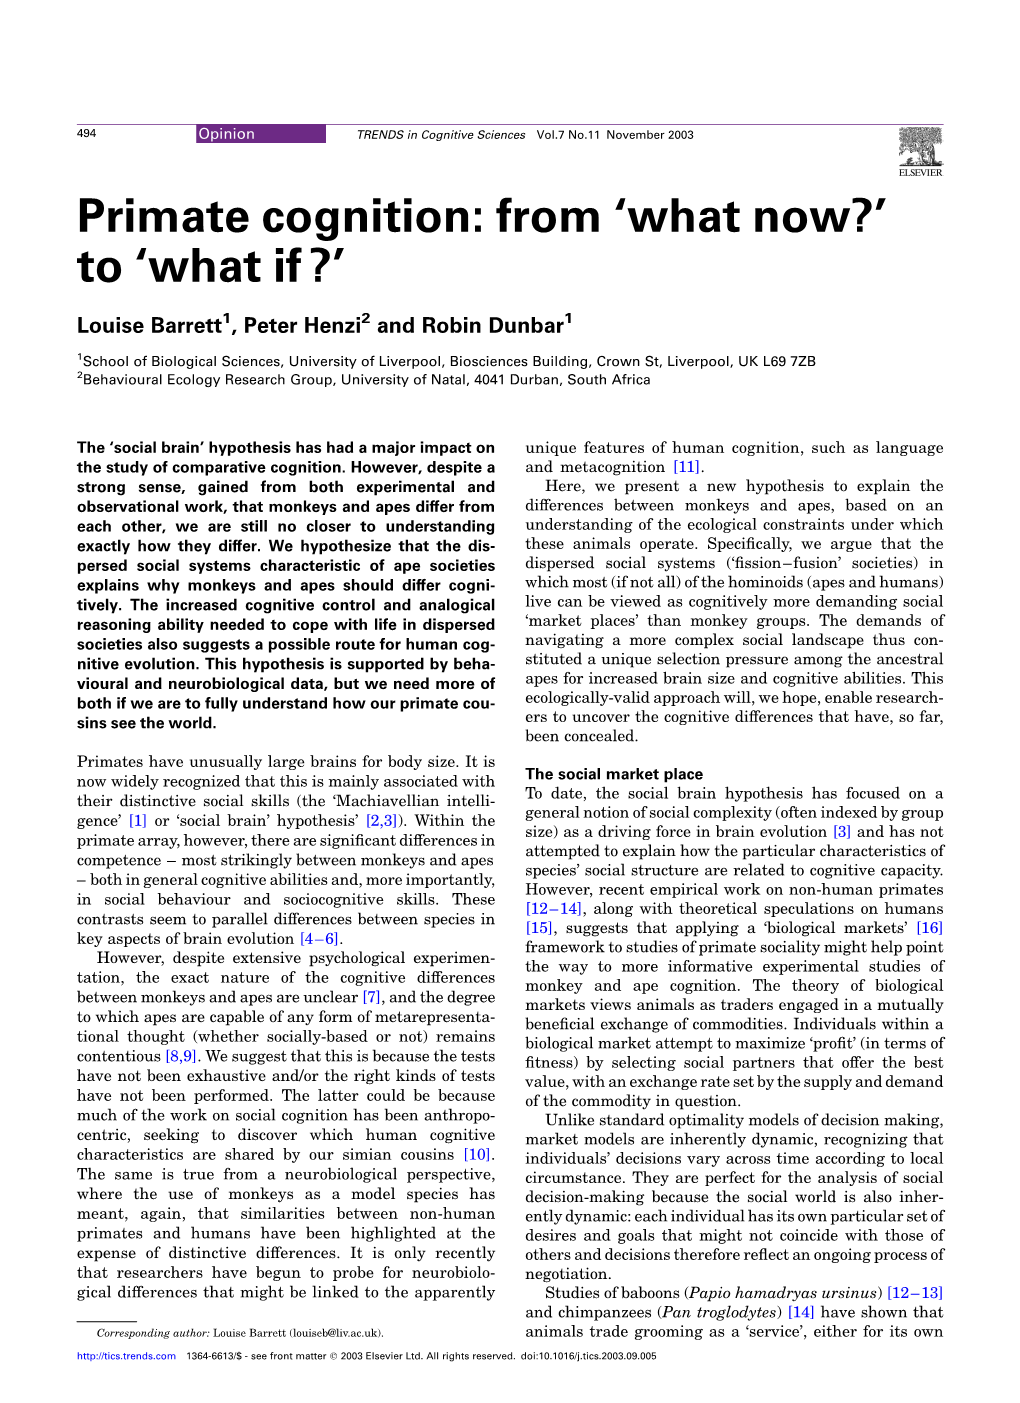 Primate Cognition: from 'What Now?' to 'What If ?'